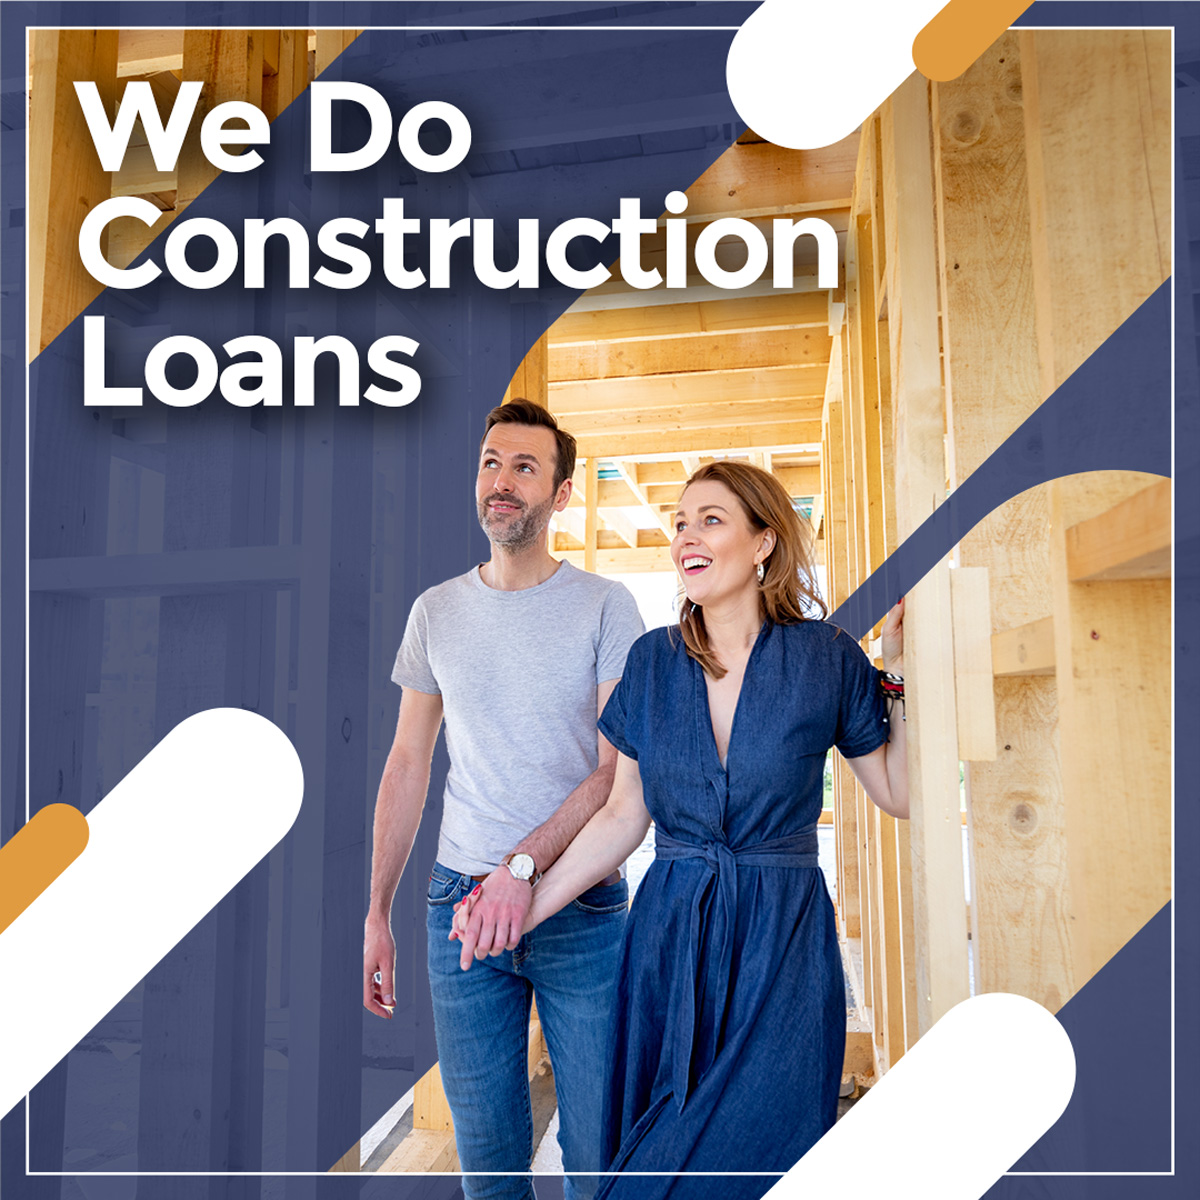 Building your dream home just got easier with a One-Time Close New Construction loan! Say goodbye to the stress and hello to your new home in no time.  #Colorado #HomeLoans #Mortgages #RealEstate #Denver #ColoradoLove #WereAllInThisTogether GibsonHomeLoans.com